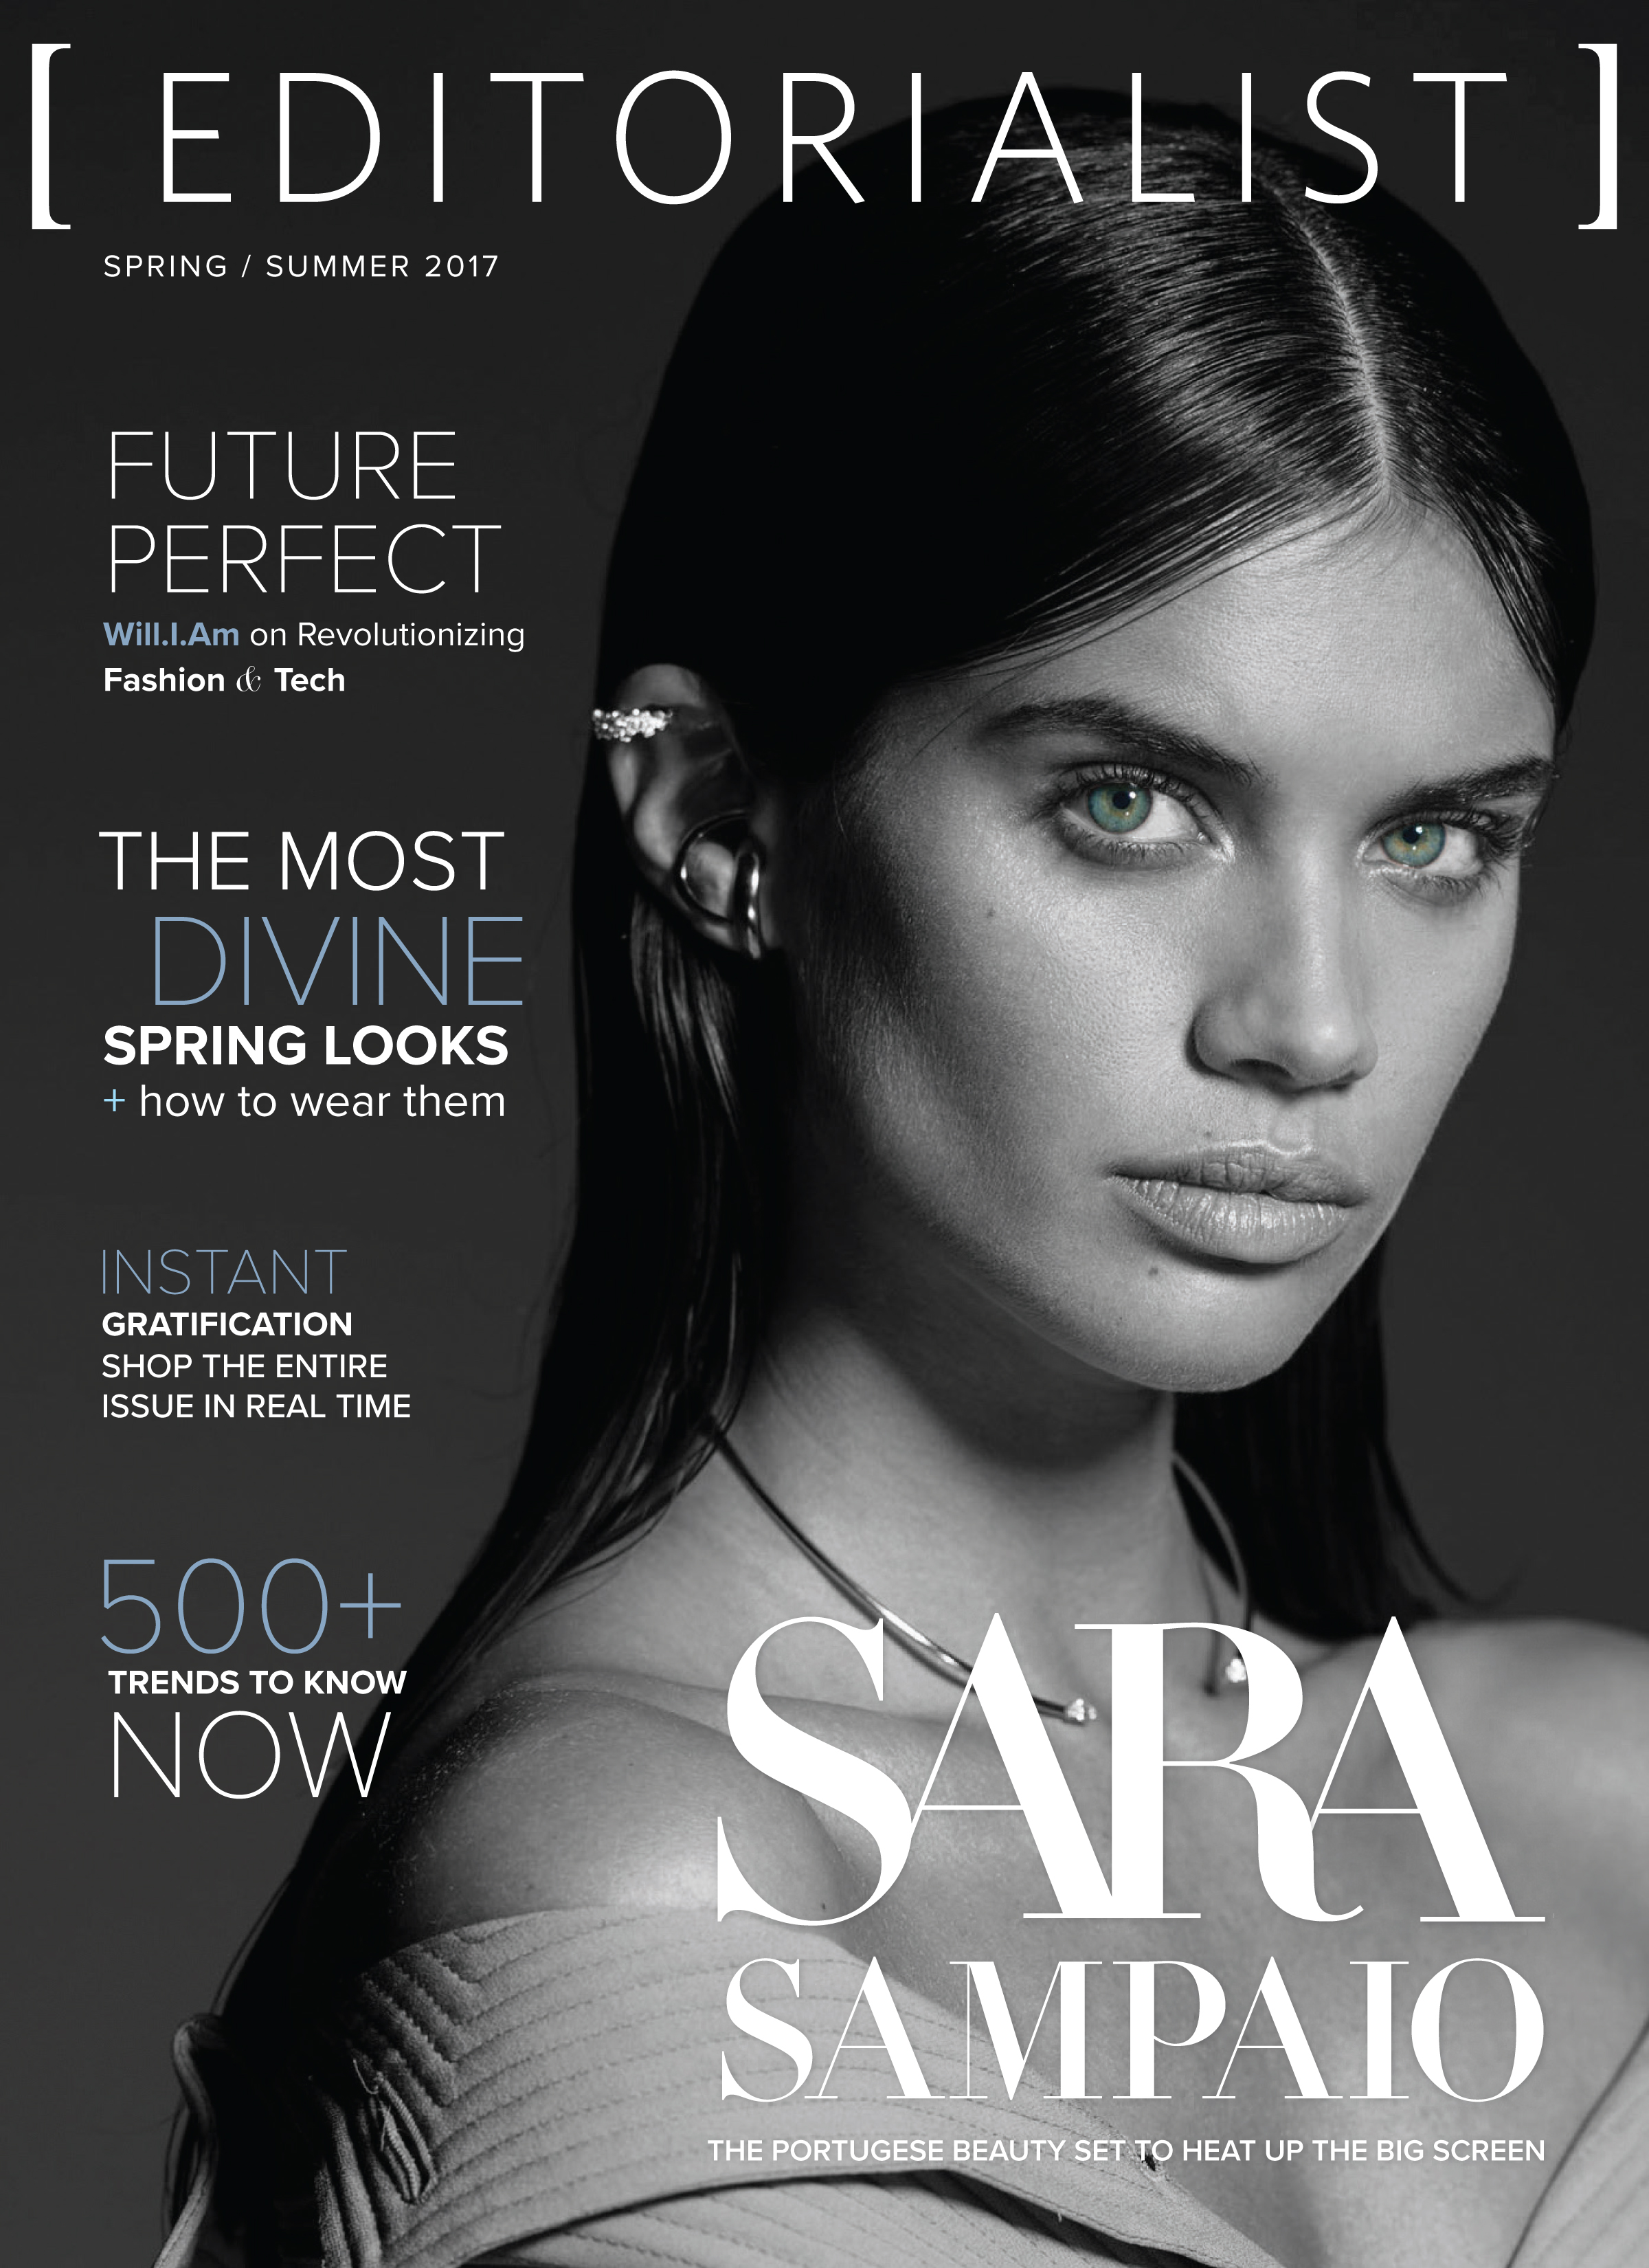 Sara Sampaio Reveals Her Acting Ambitions to the Editorialist